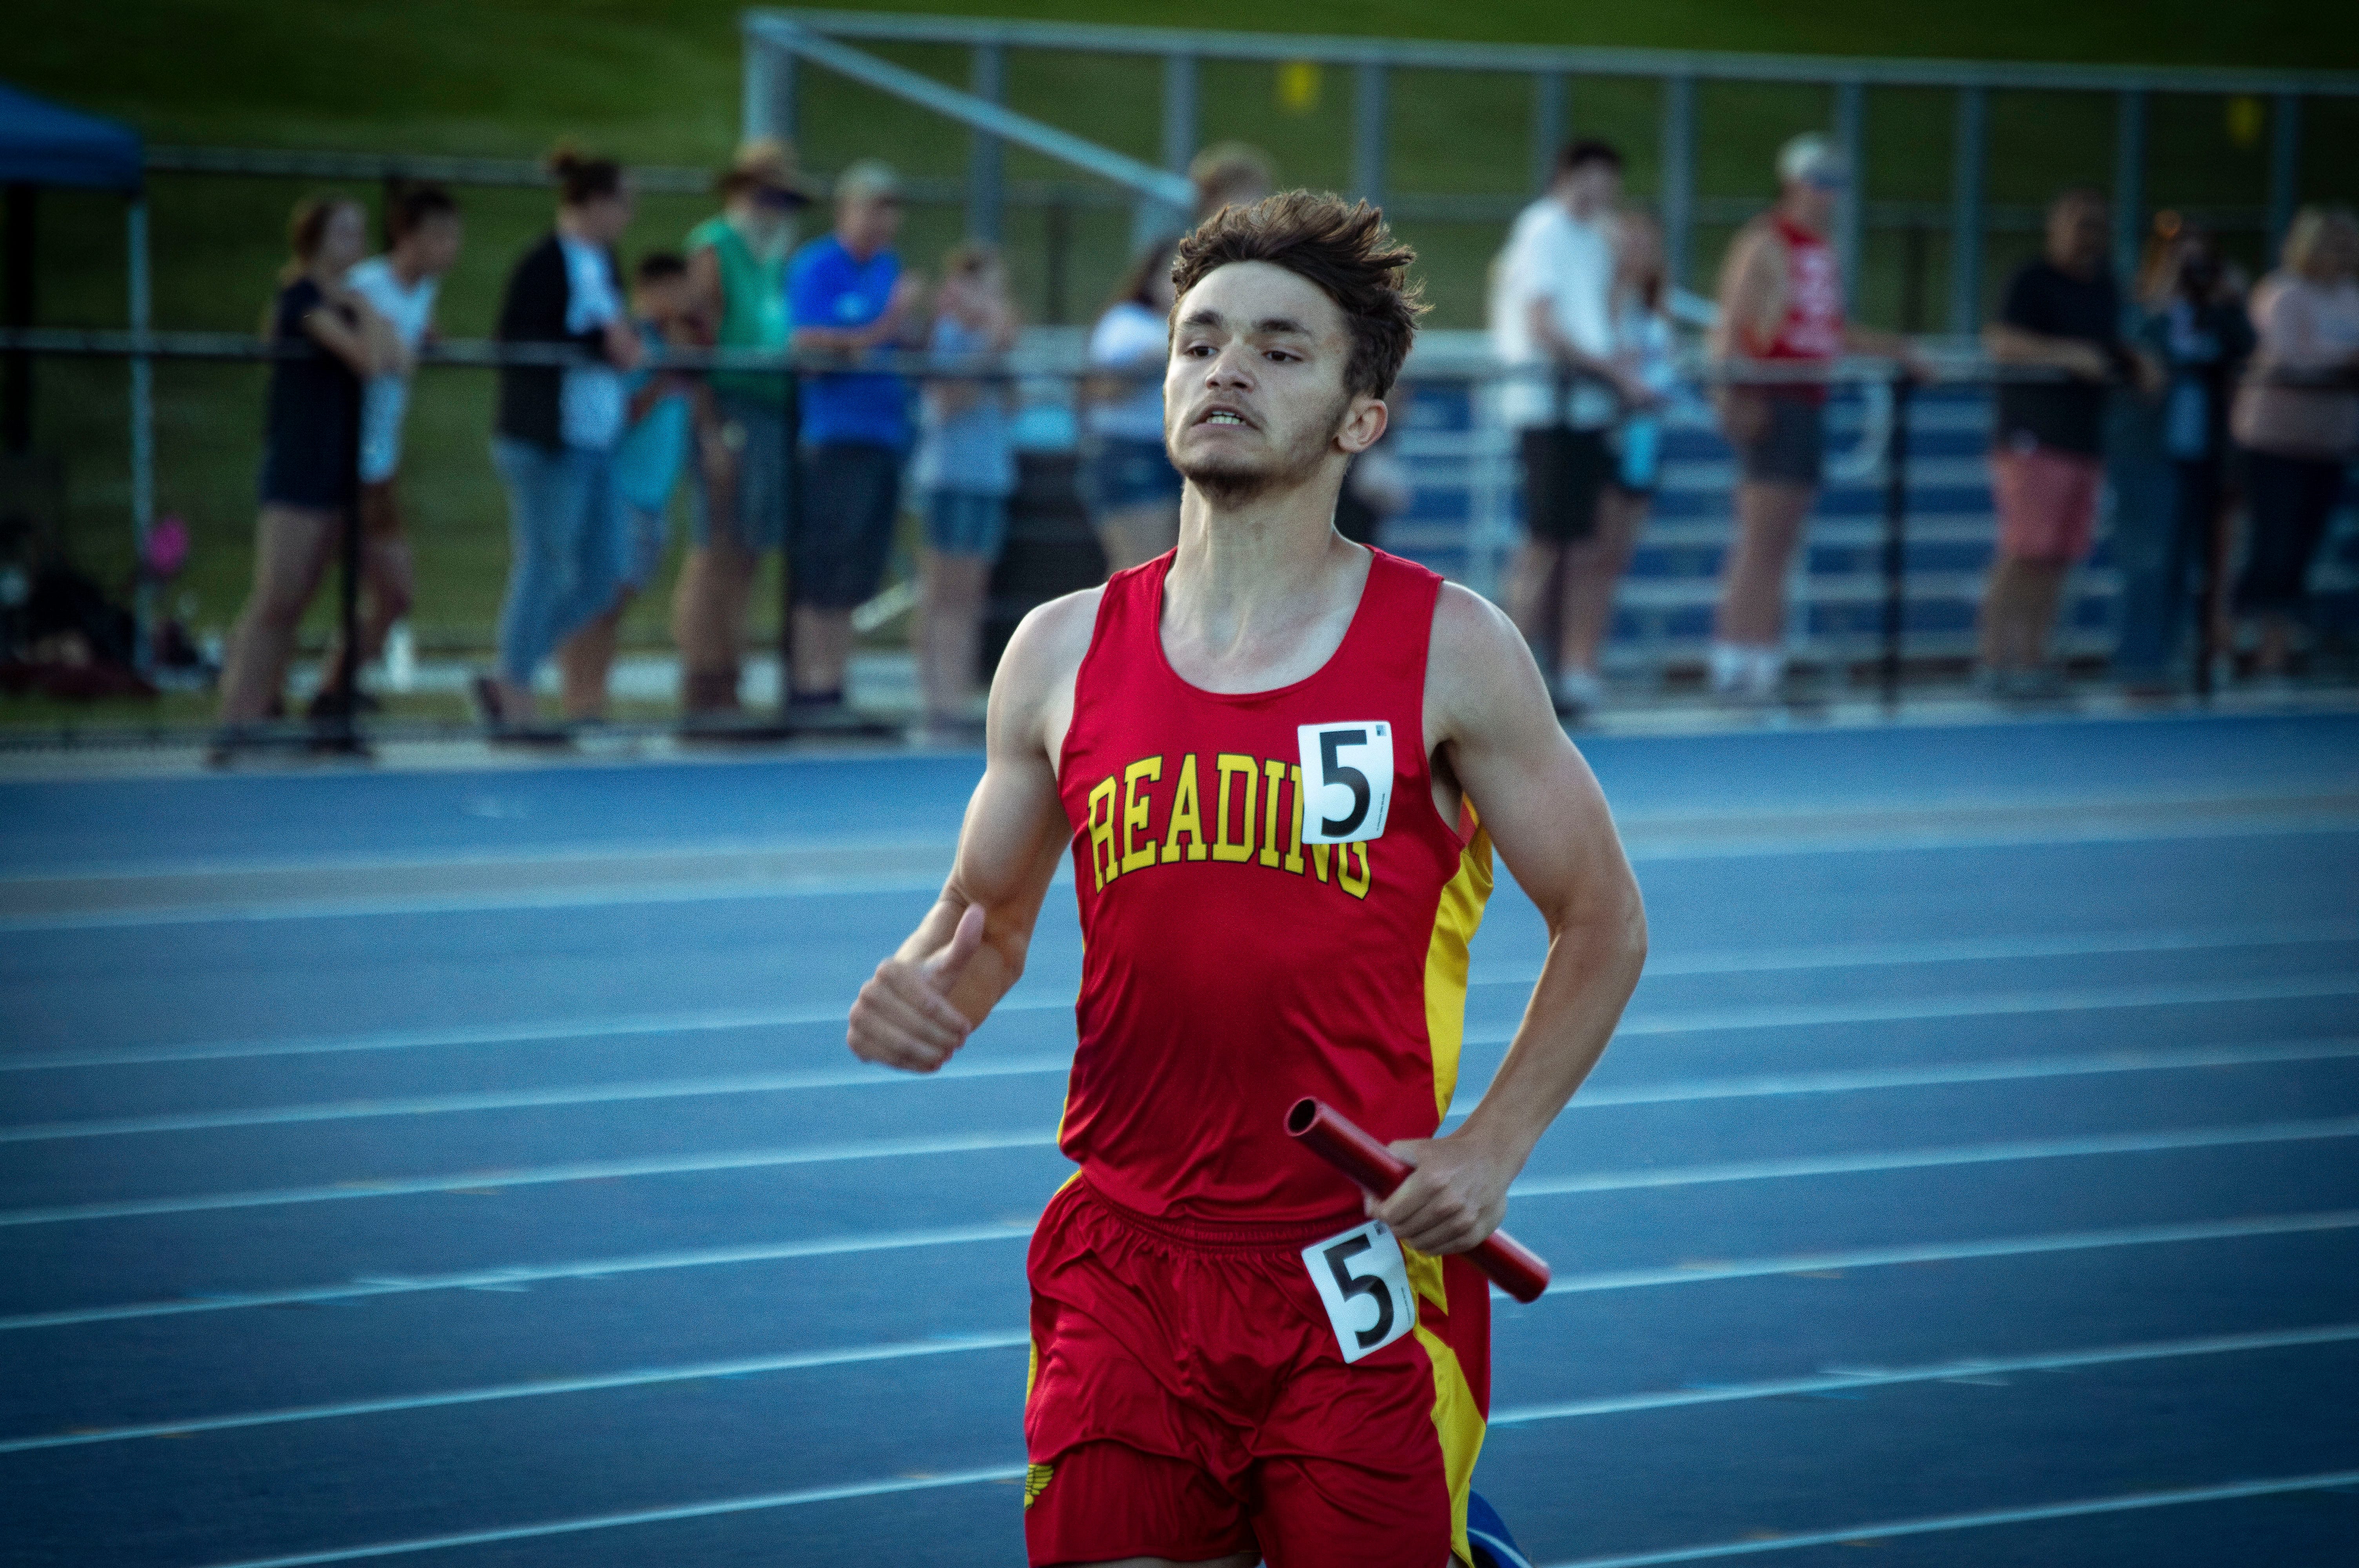 Check out the final rankings before the Hillsdale County Area Best boys track meet